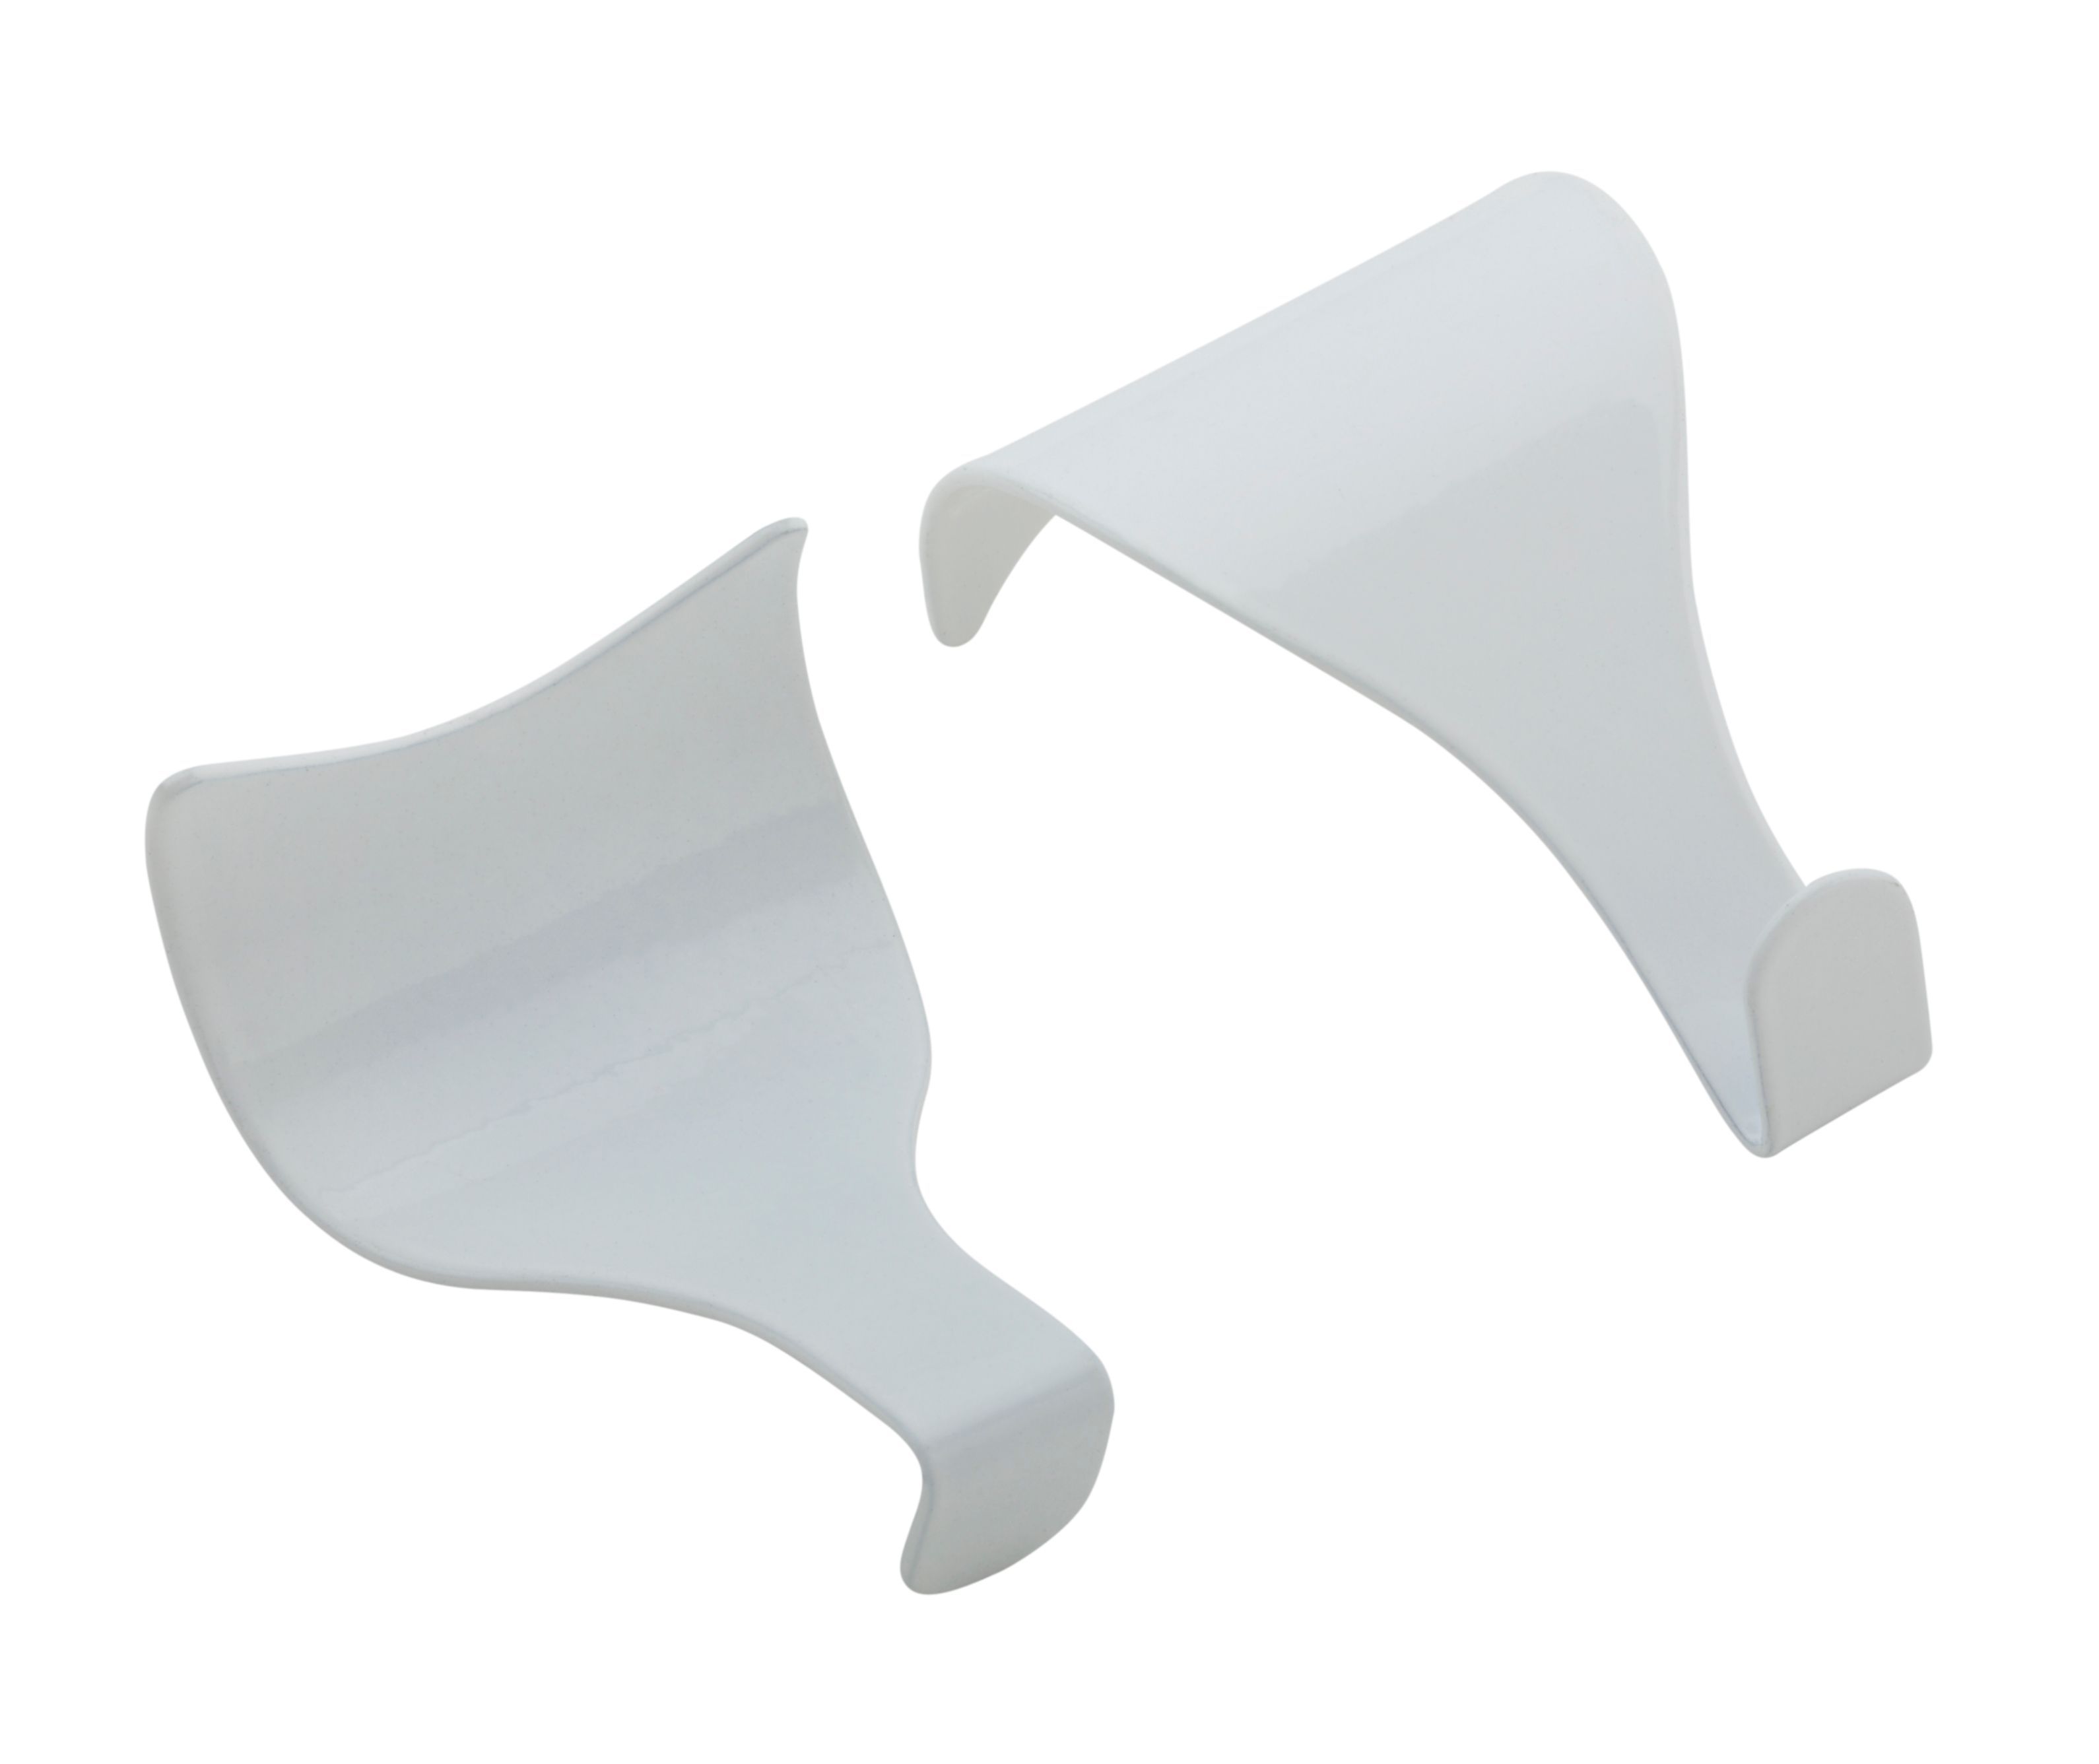 B&Q White Picture Hook Pack of 2 | Departments | DIY at B&Q